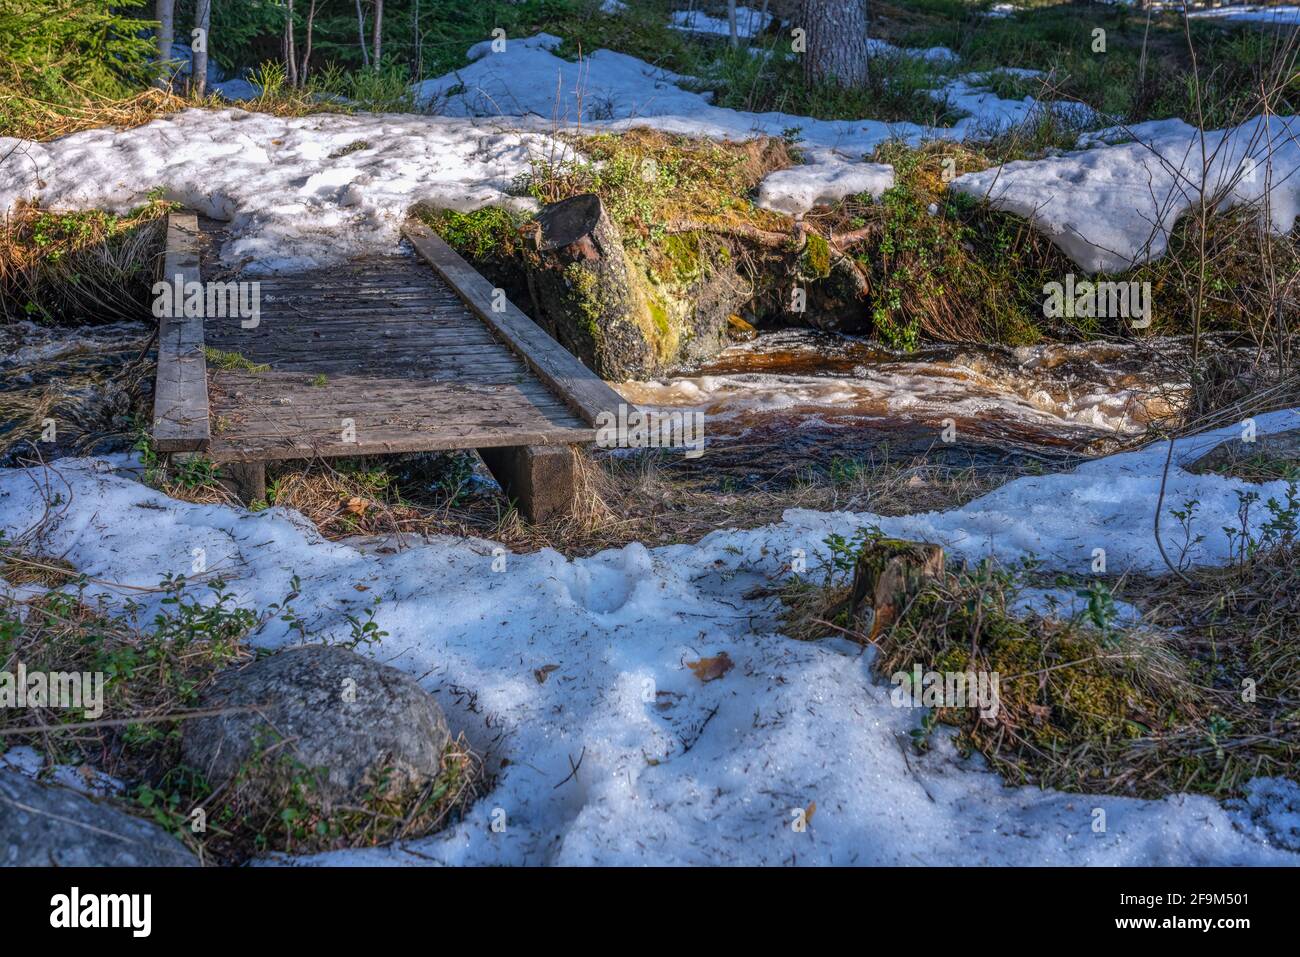 Very small wooden flat bridge over forest creek much water flowing under it. Melting snow in forest close to the running water. Stock Photo